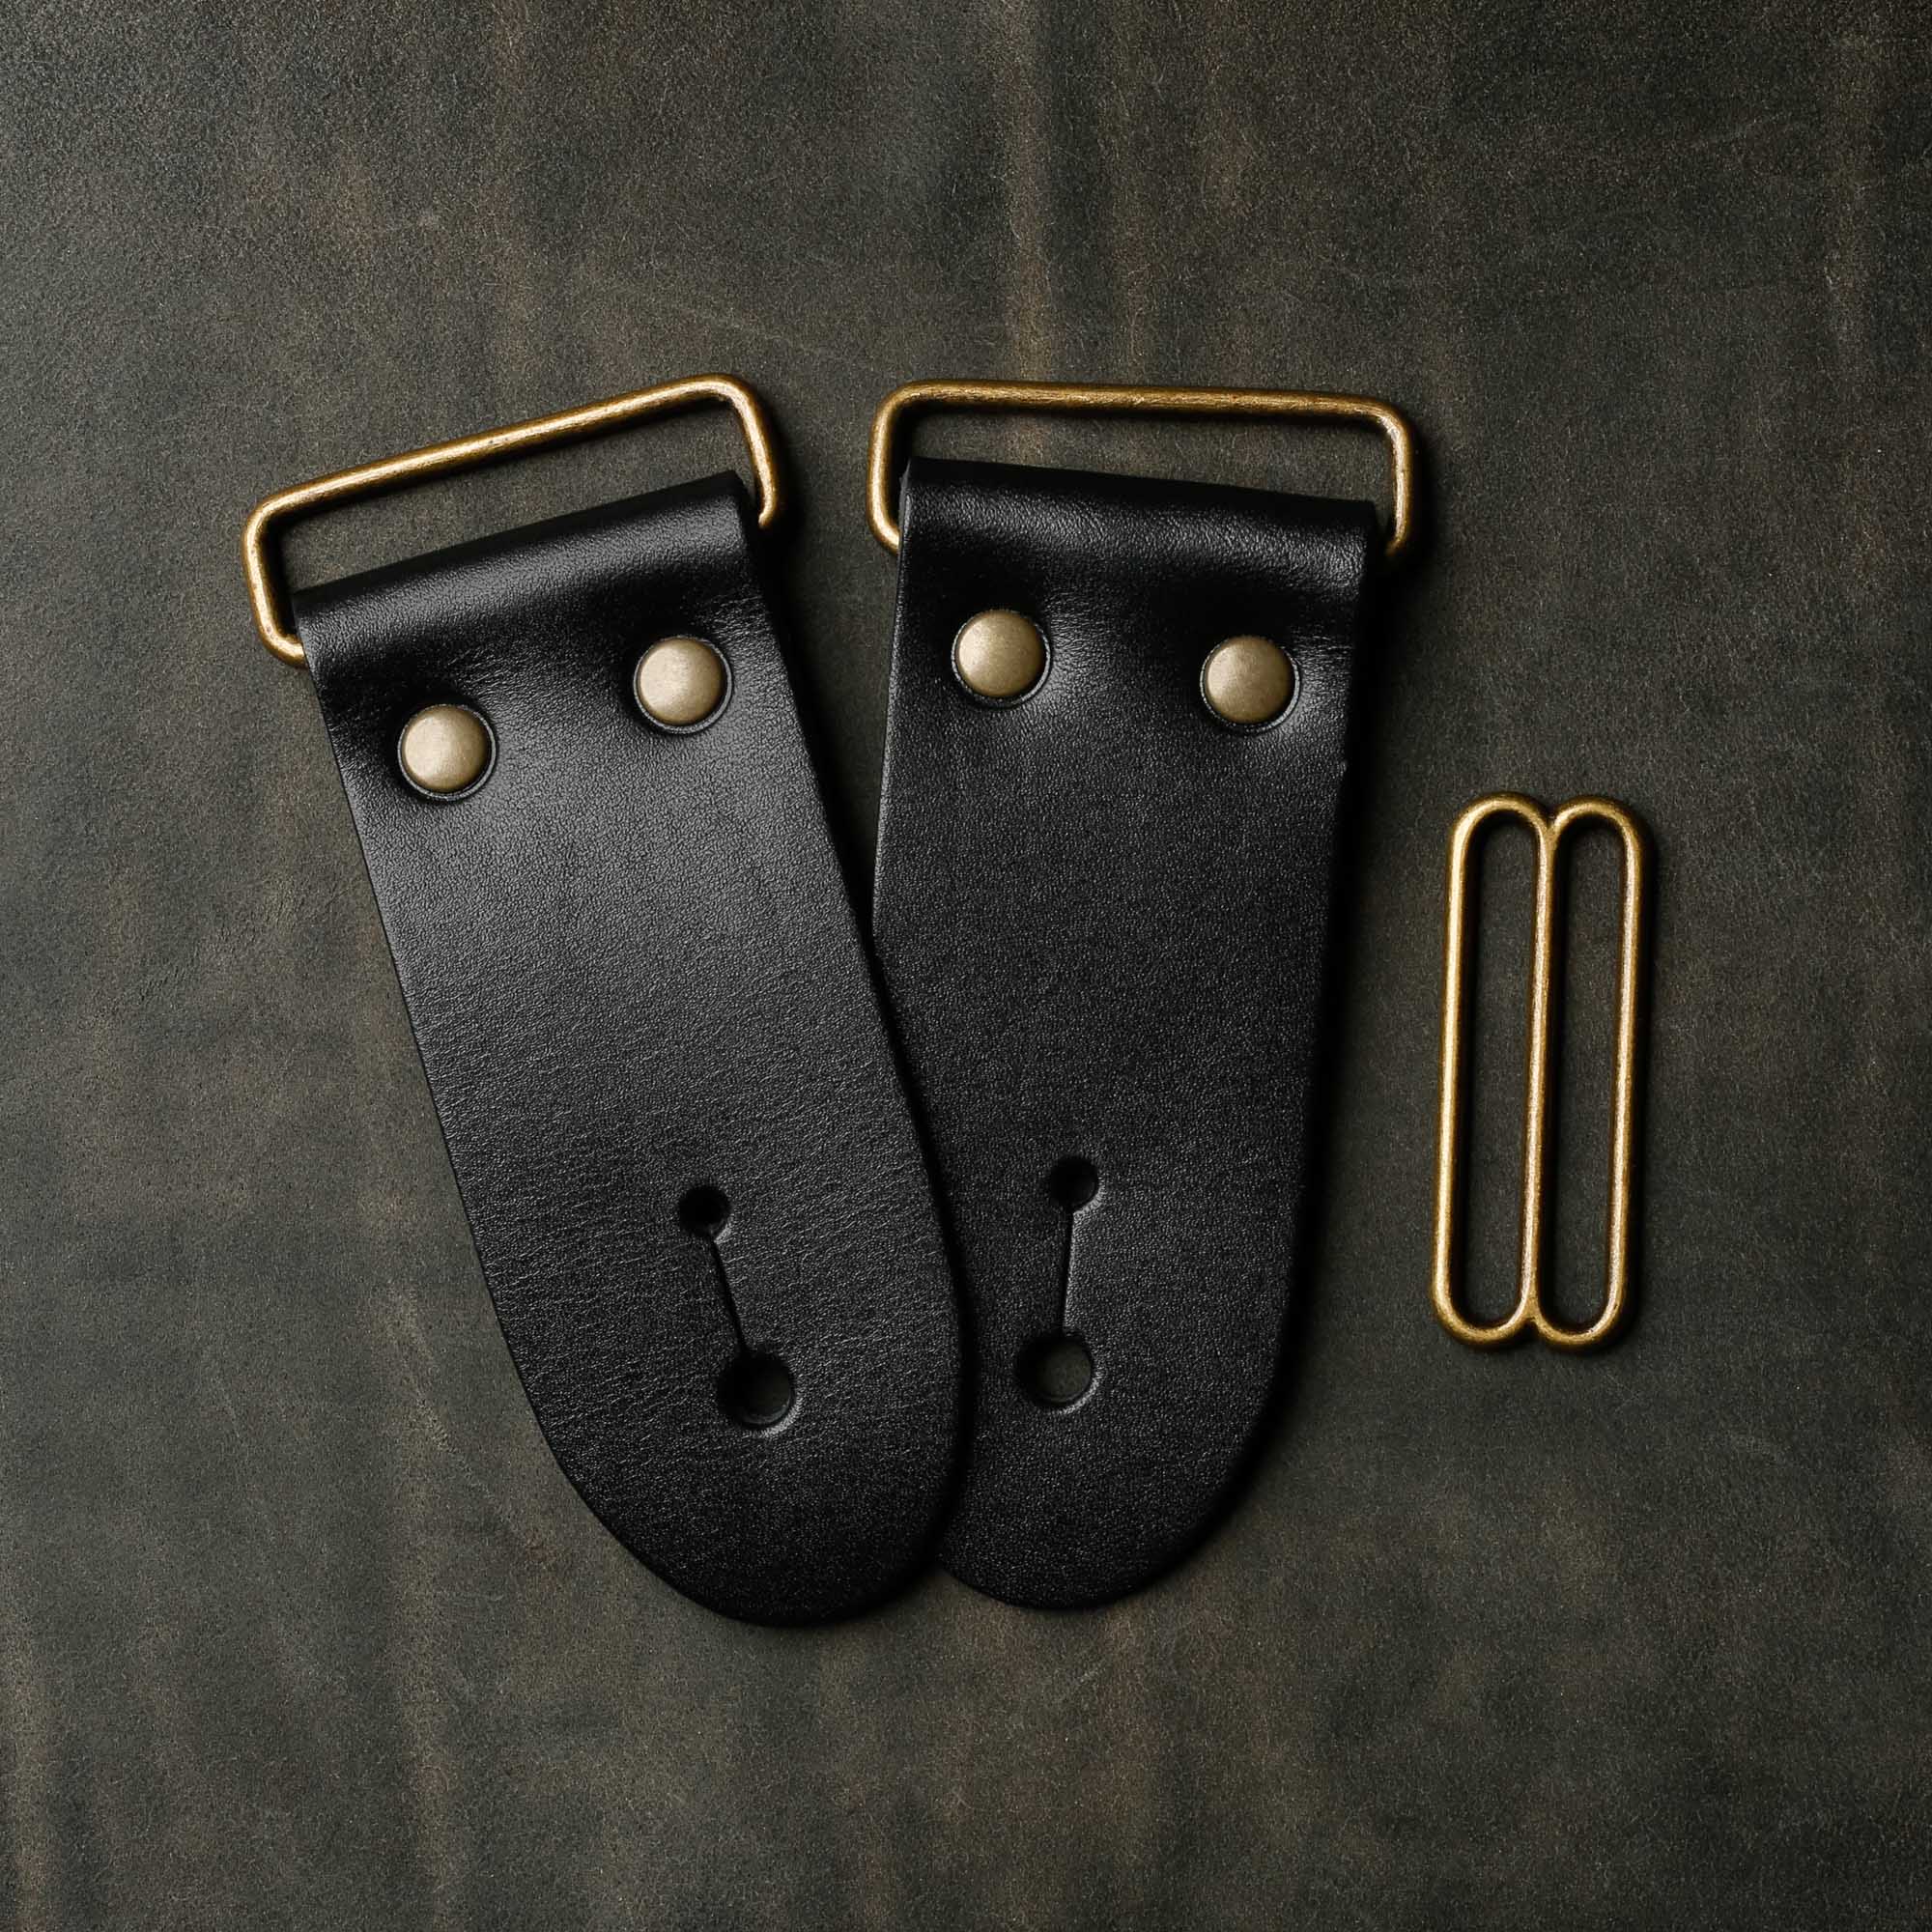 LEATHER STRAP & HARDWARE One, Two or Three Piece Leather Strap Set